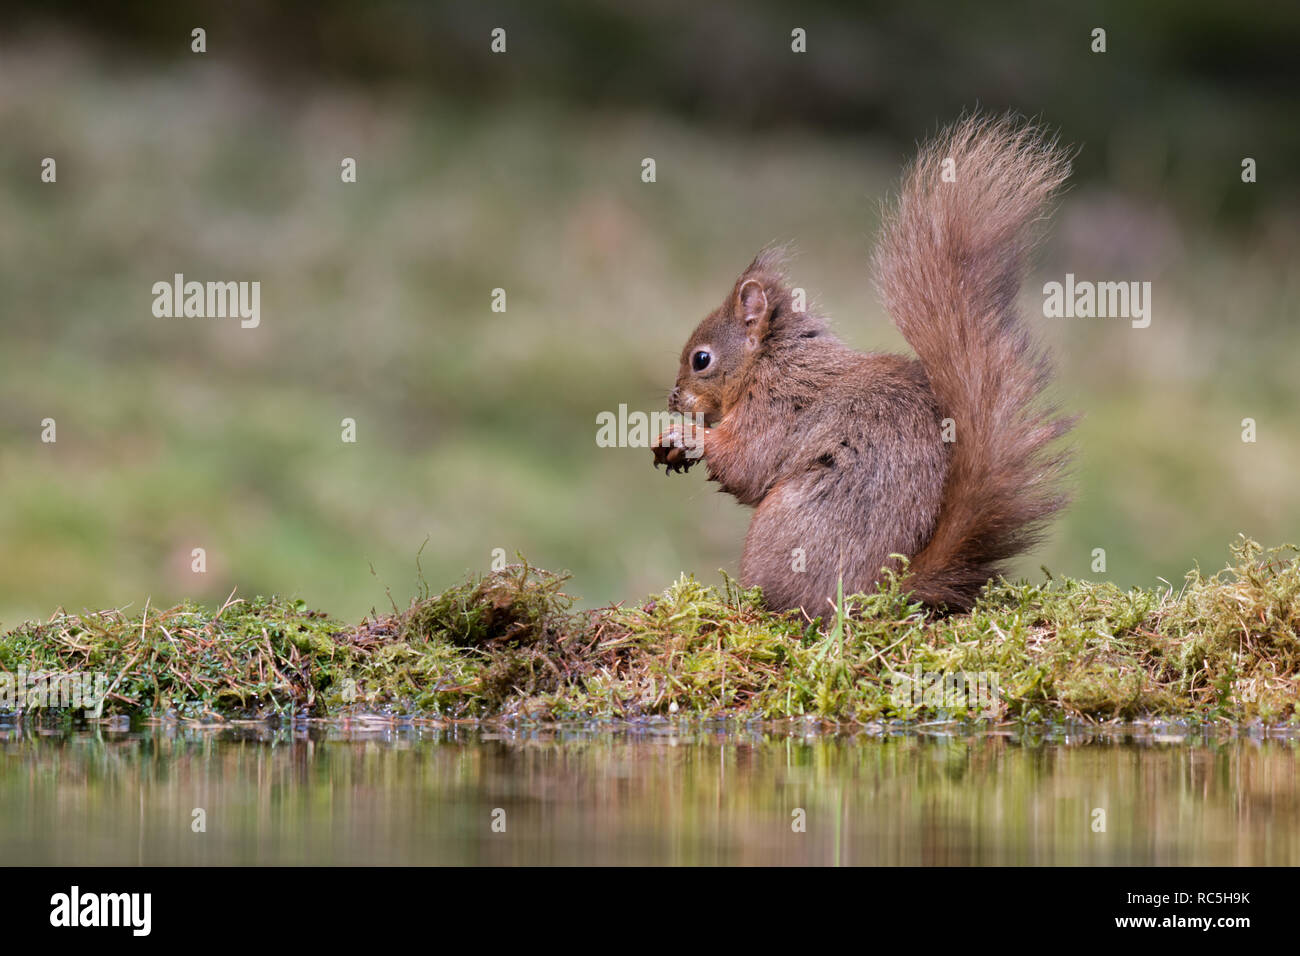 A red squirrel sitting by the edge of a pool eating. Taken at a low level it shows a slight reflection in the water Stock Photo